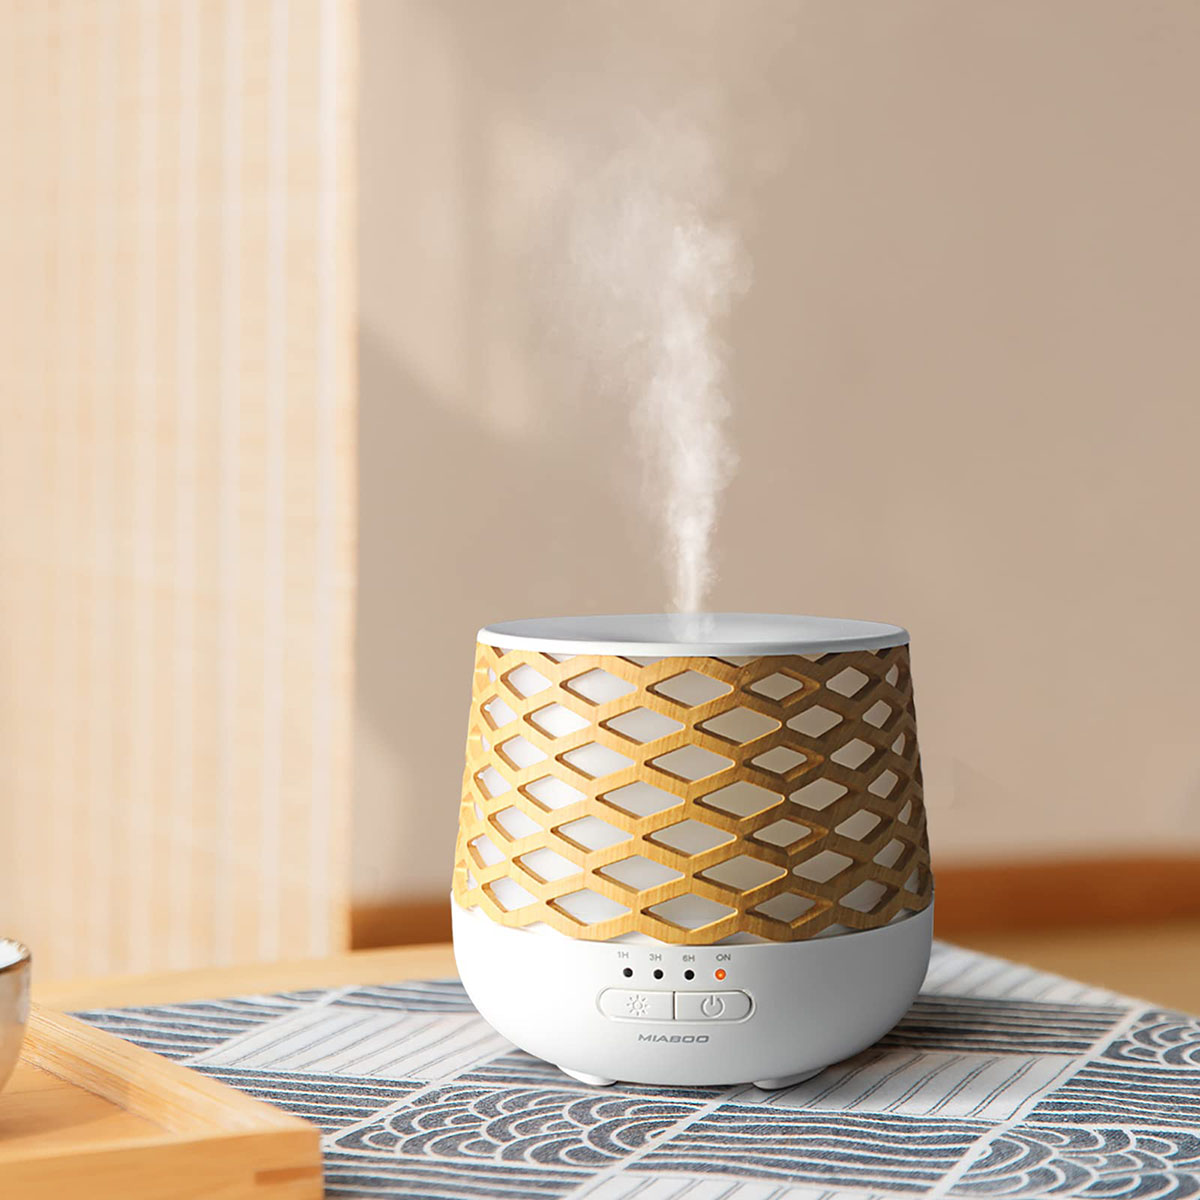 How Does An Essential Oil Diffuser Work